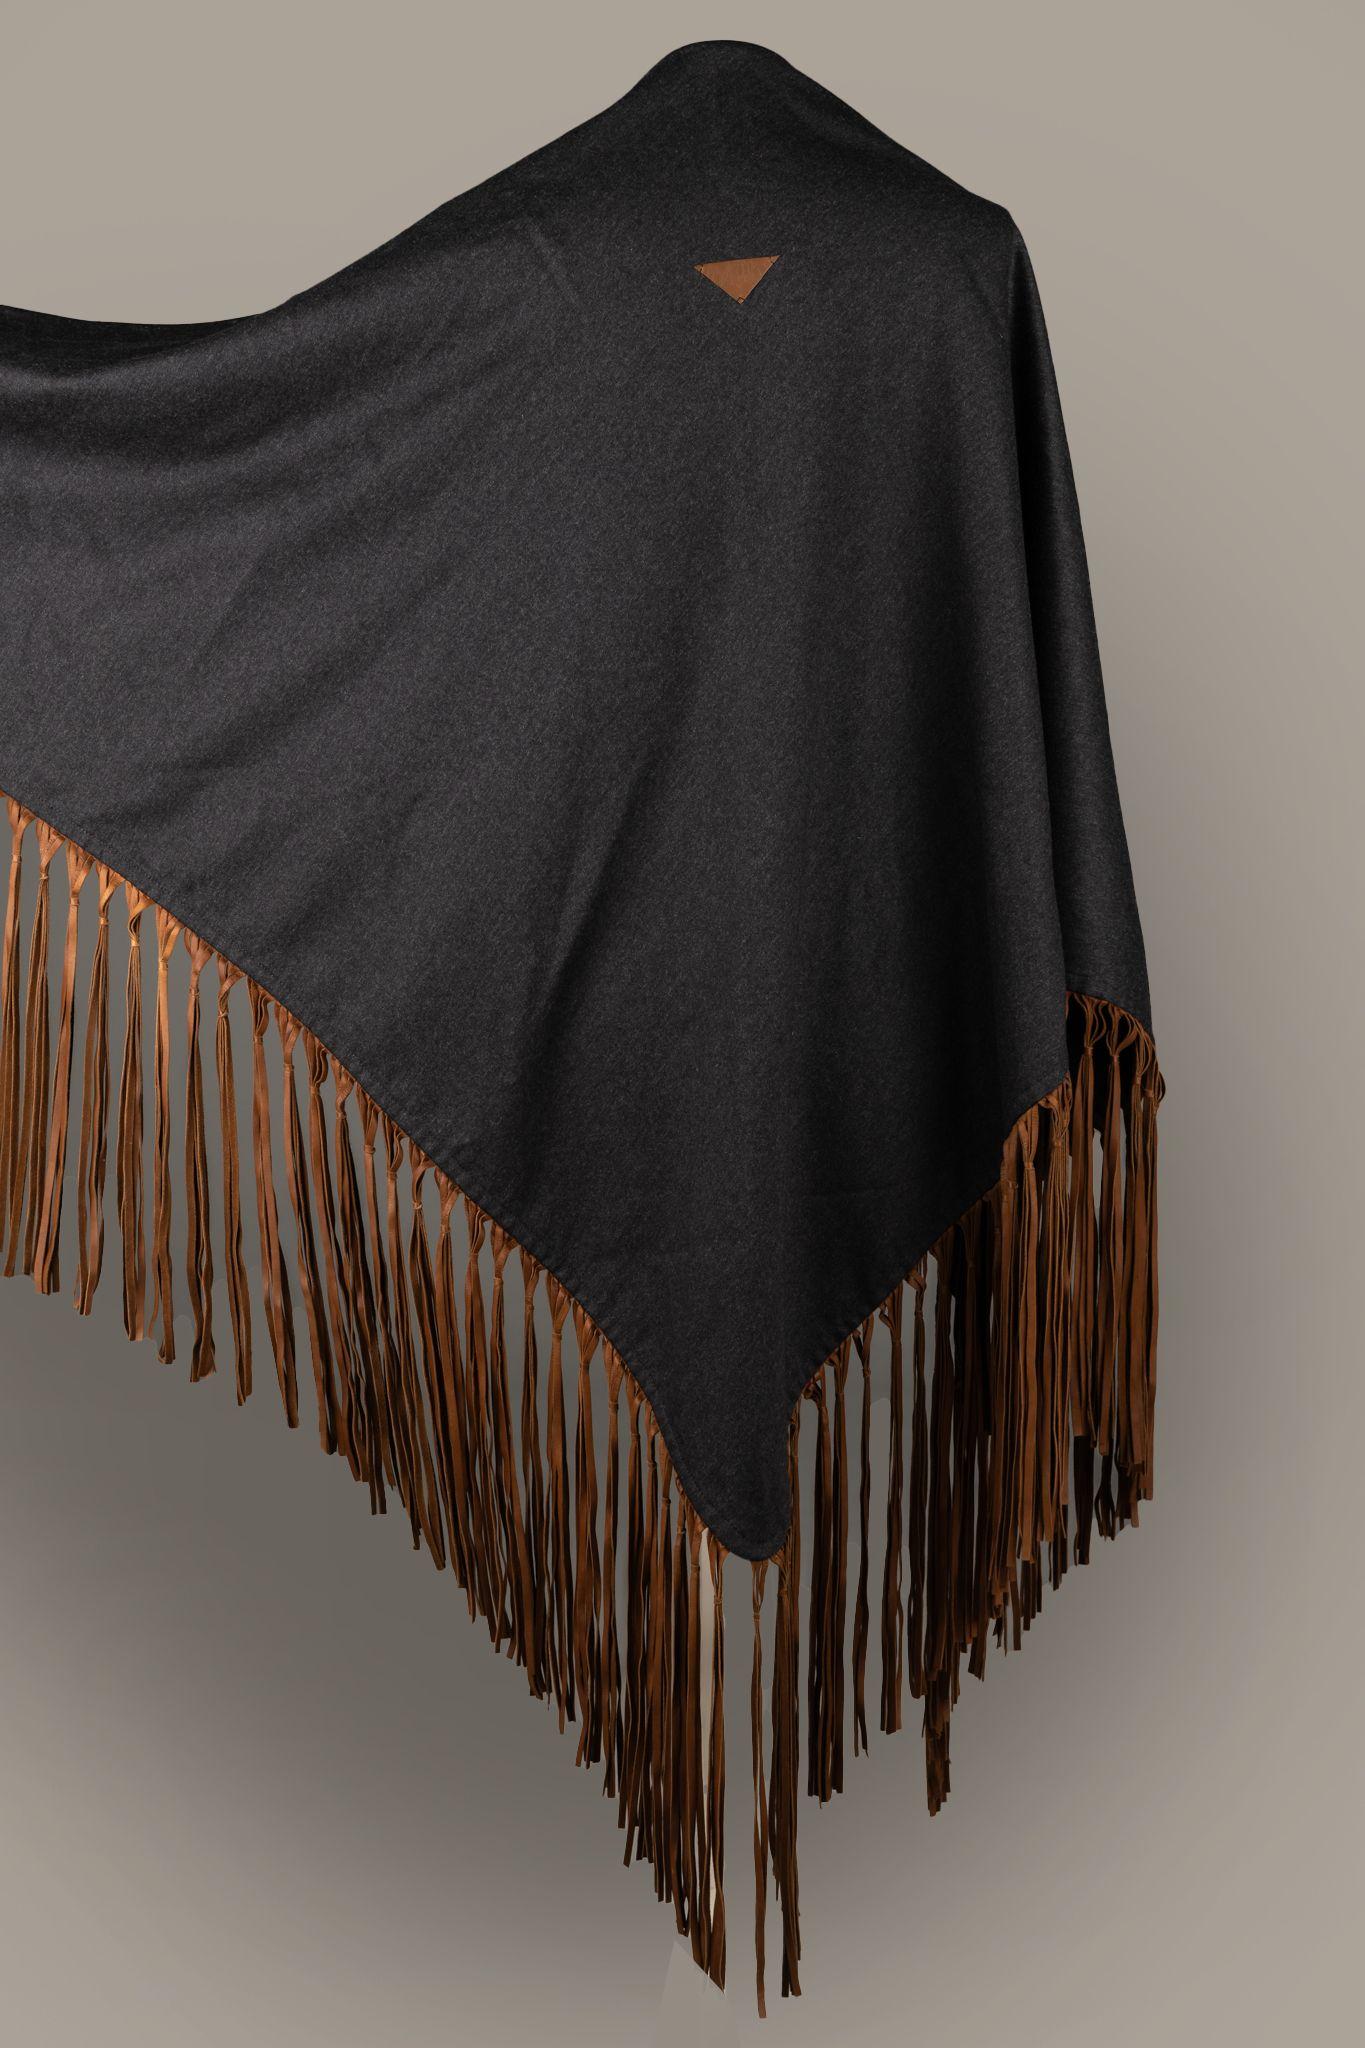 Hermès vintage grey shawl with long fringes. Excellent condition. 
Trim in lamb leather with fringe.
90% wool, 10% cashmere .